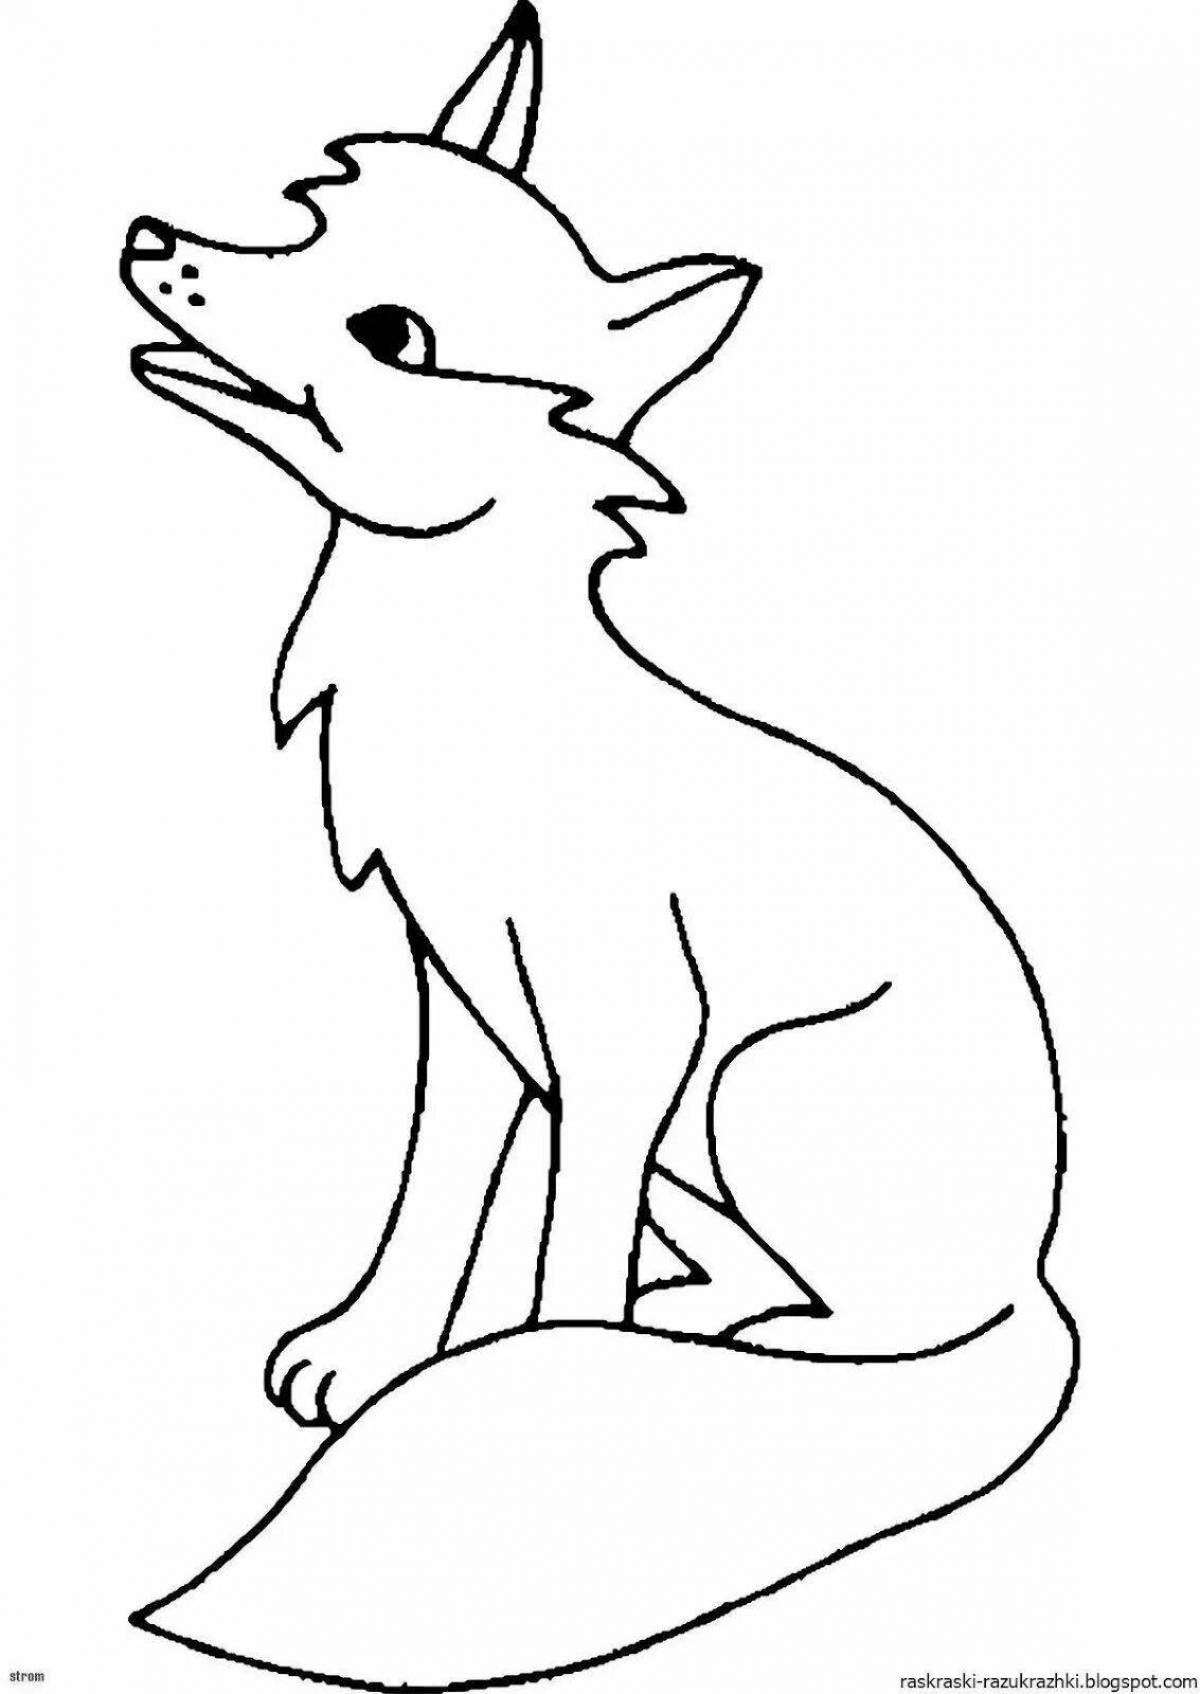 Coloring page mischievous sitting fox